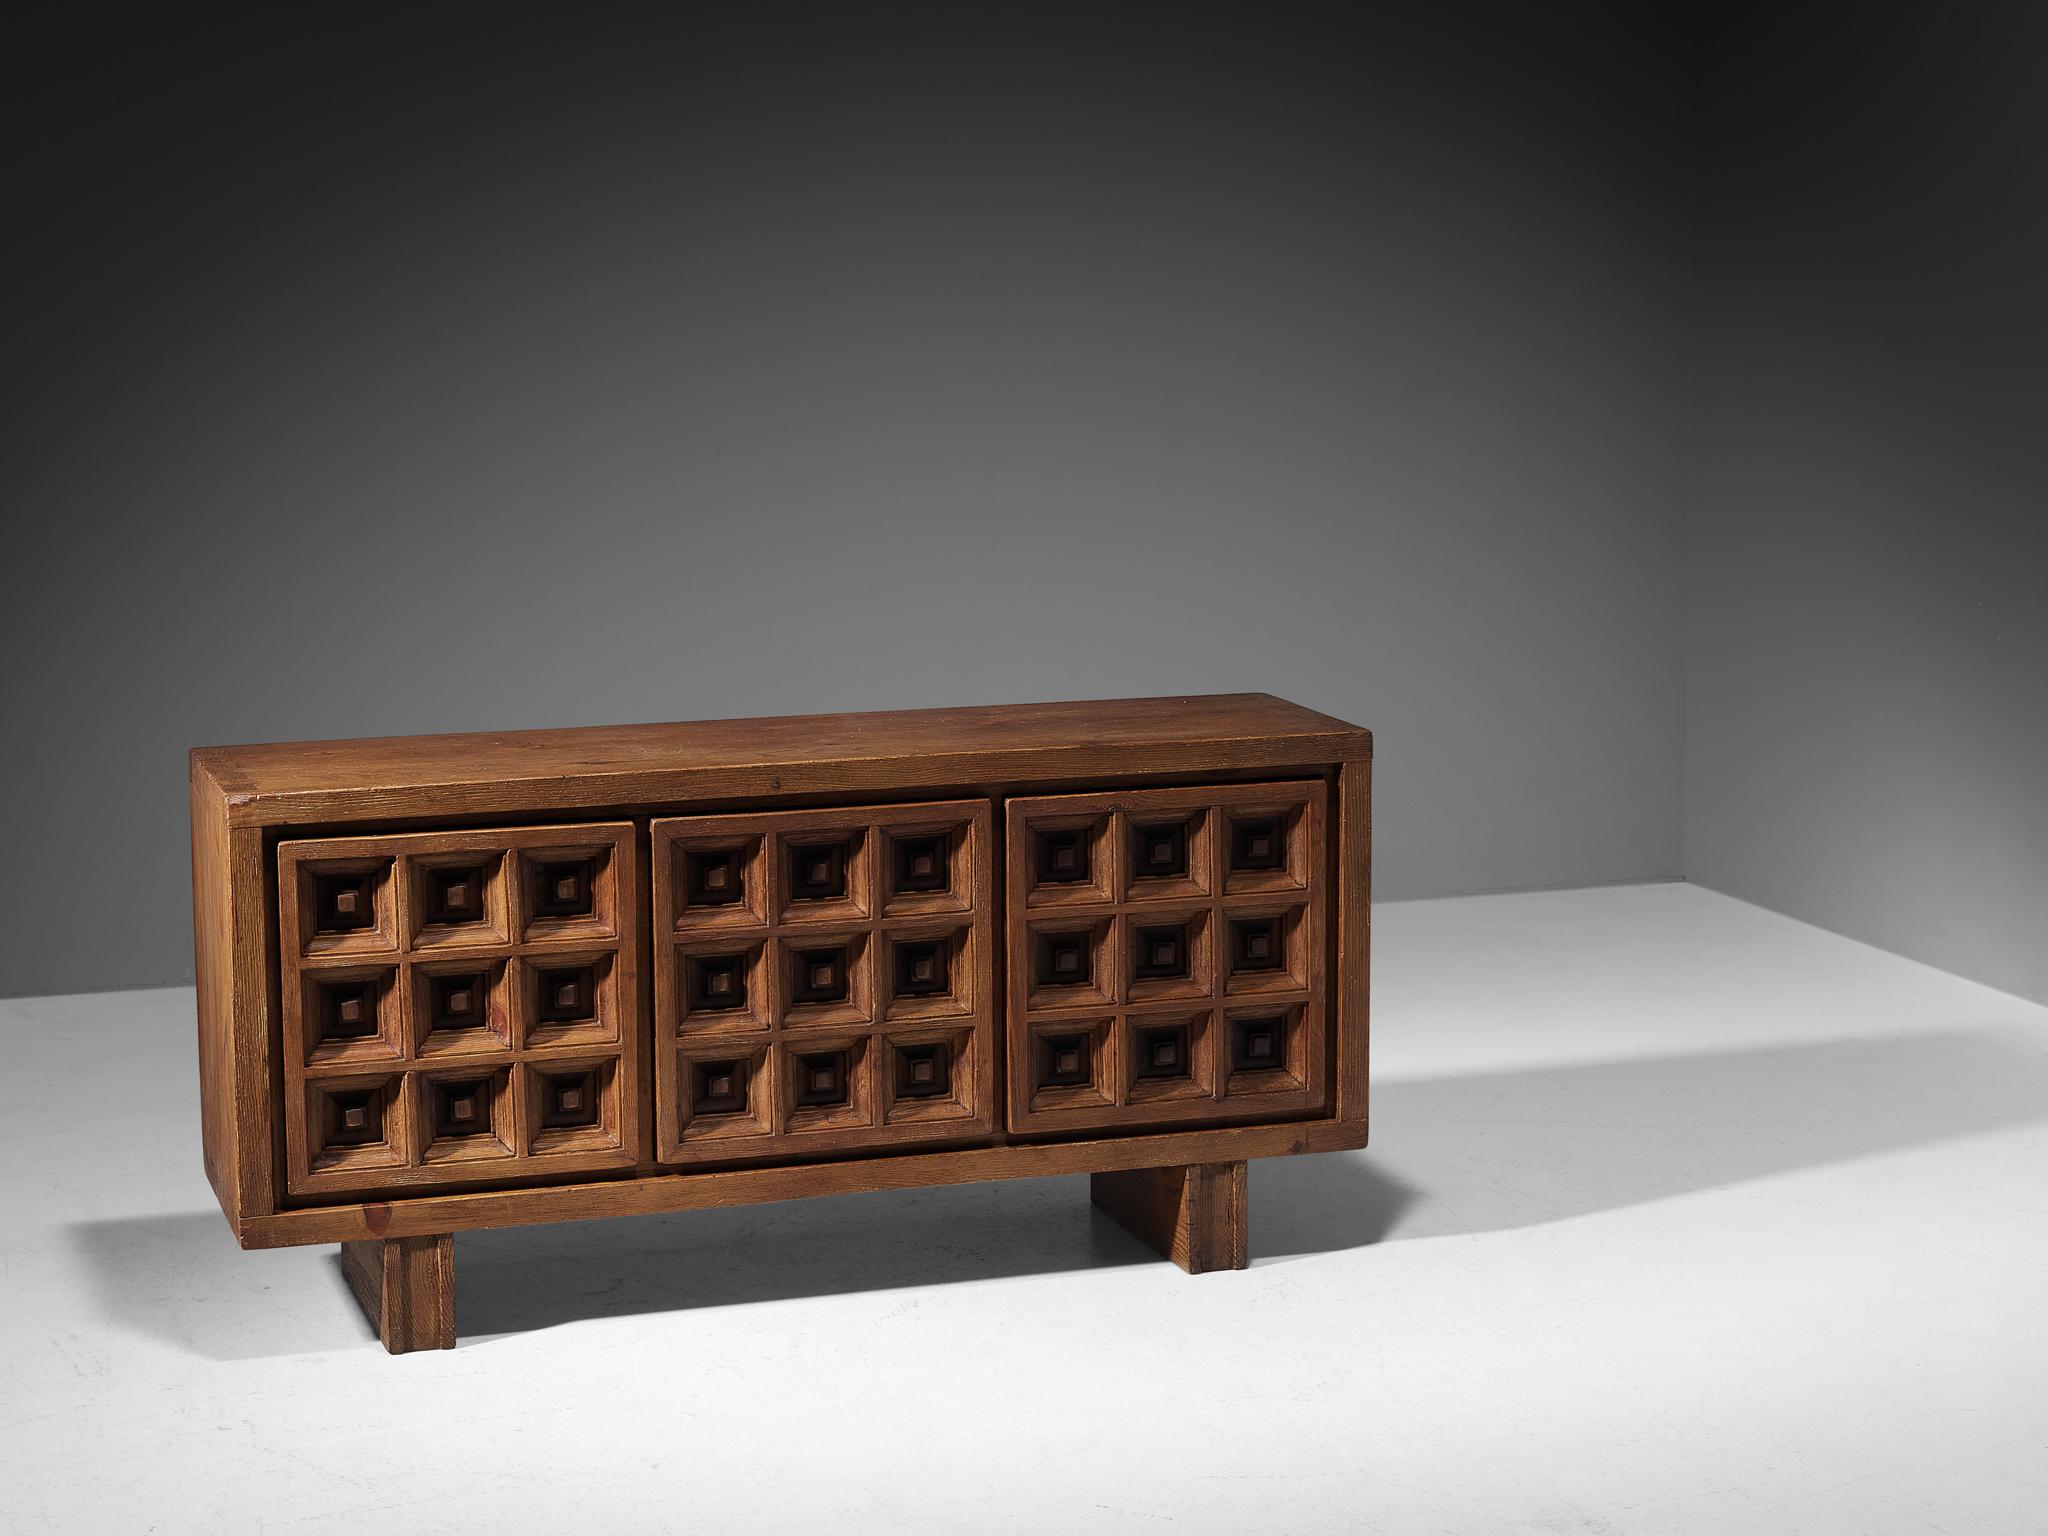 Biosca, sideboard, stained pine, Spain, 1960s.

Outstanding Spanish sideboard that is executed by Biosca in a beautiful way. The door panels feature a relief surface of graphic carved squares. This is very typical for Brutalist style, while the type